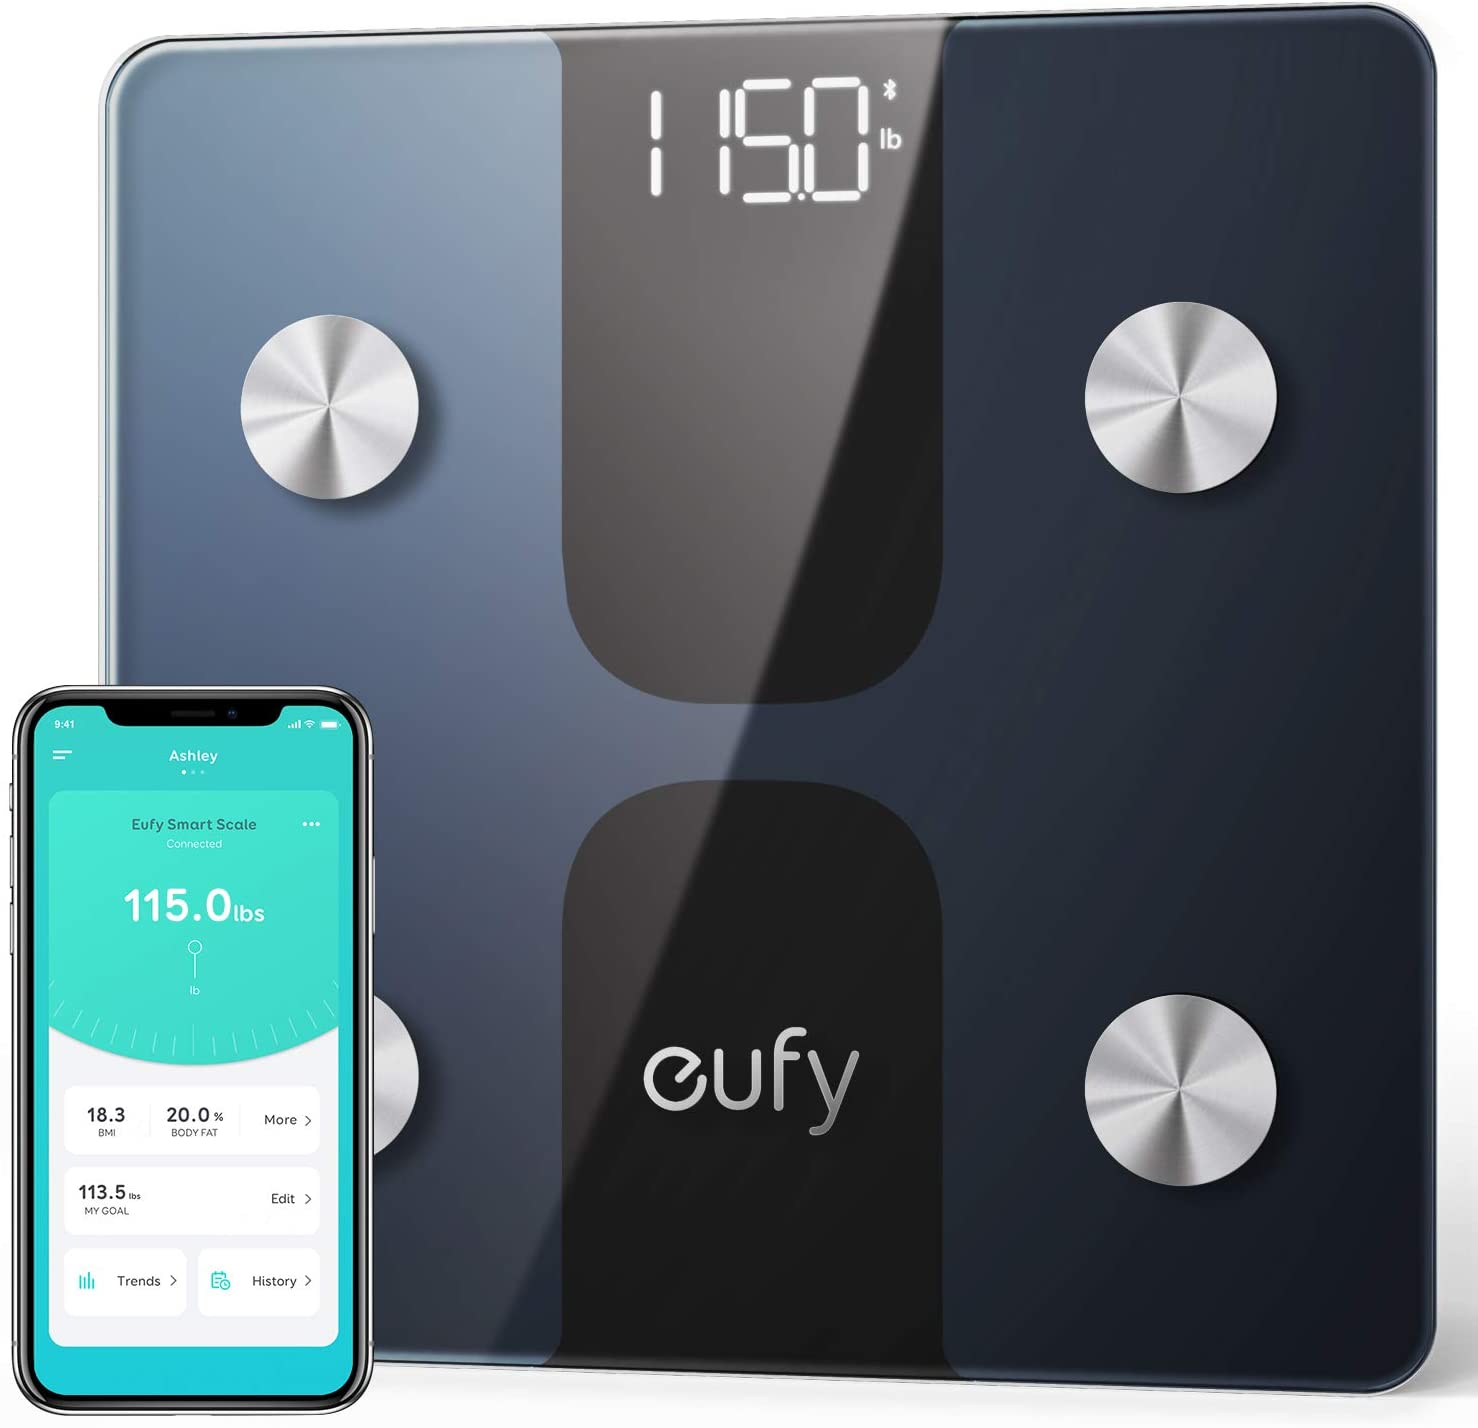 Save 41% OFF on eufy Smart Scale C1 with Bluetooth, Body Fat Scale $17.80